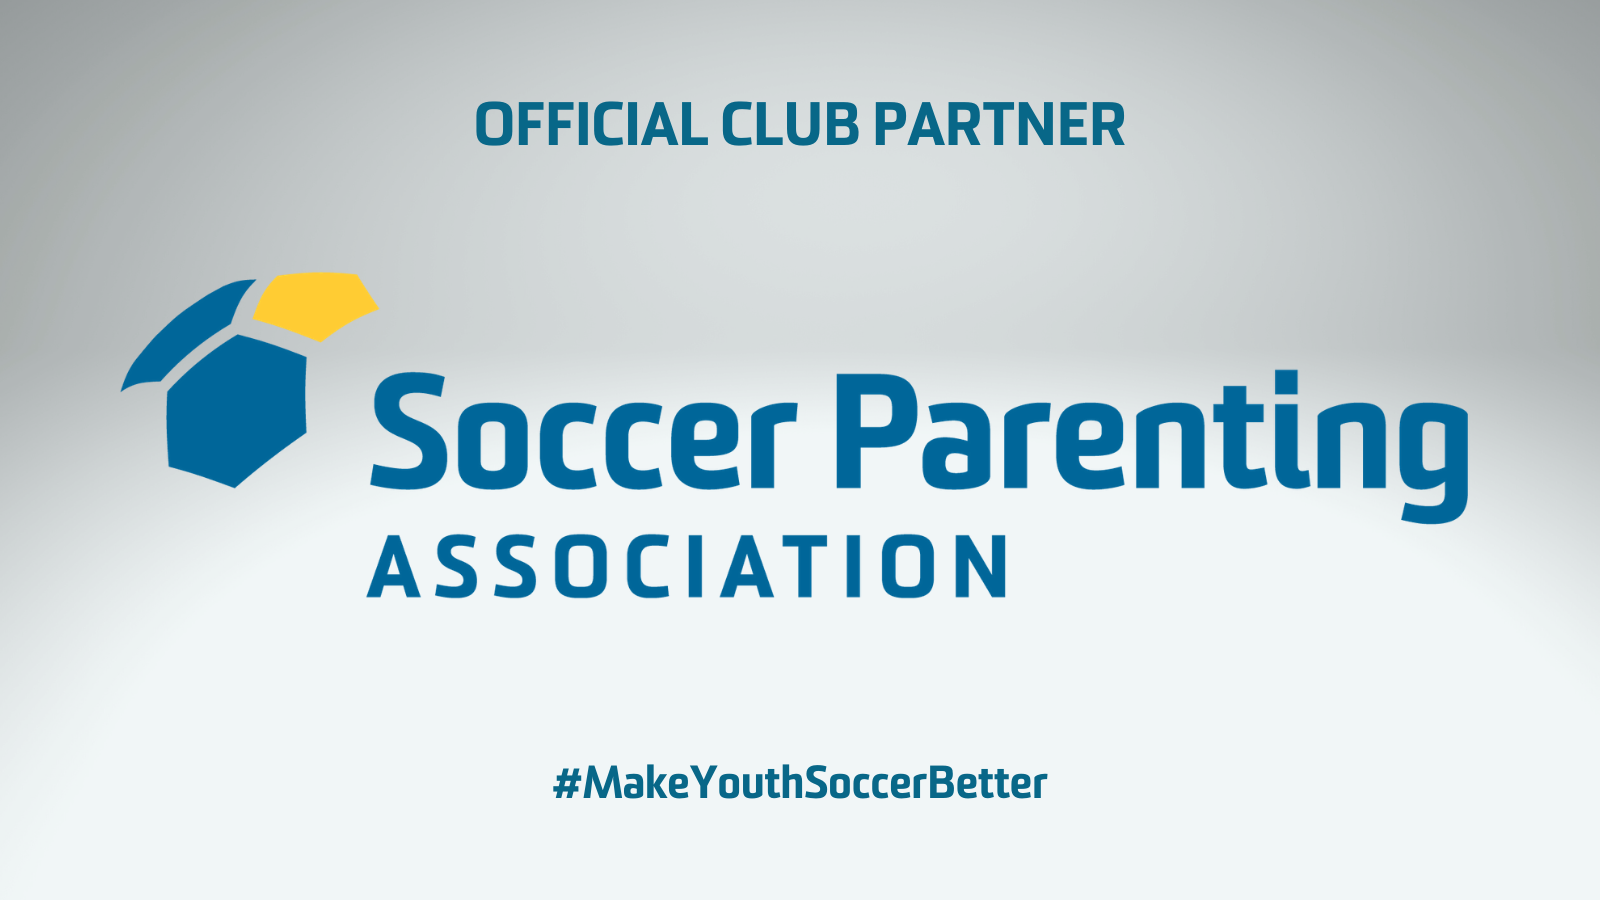 Welcome to Soccer Parenting!